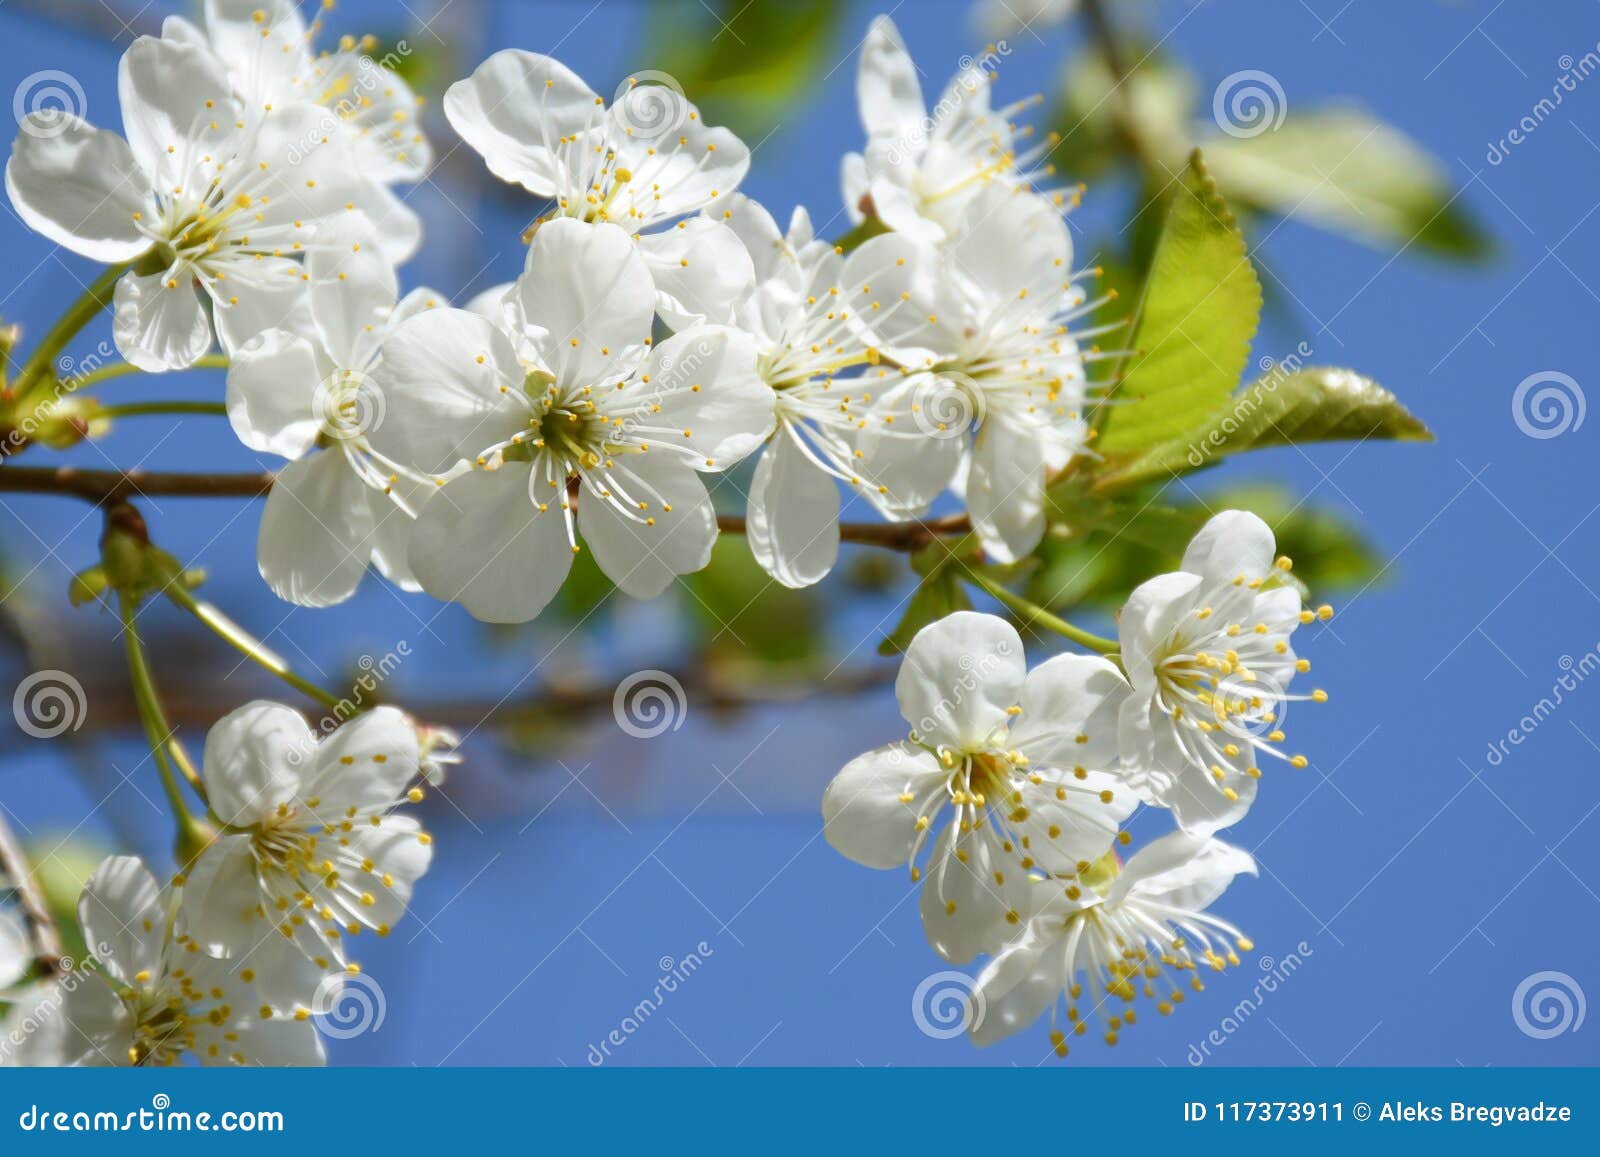 Flowering cherry tree blossoms background